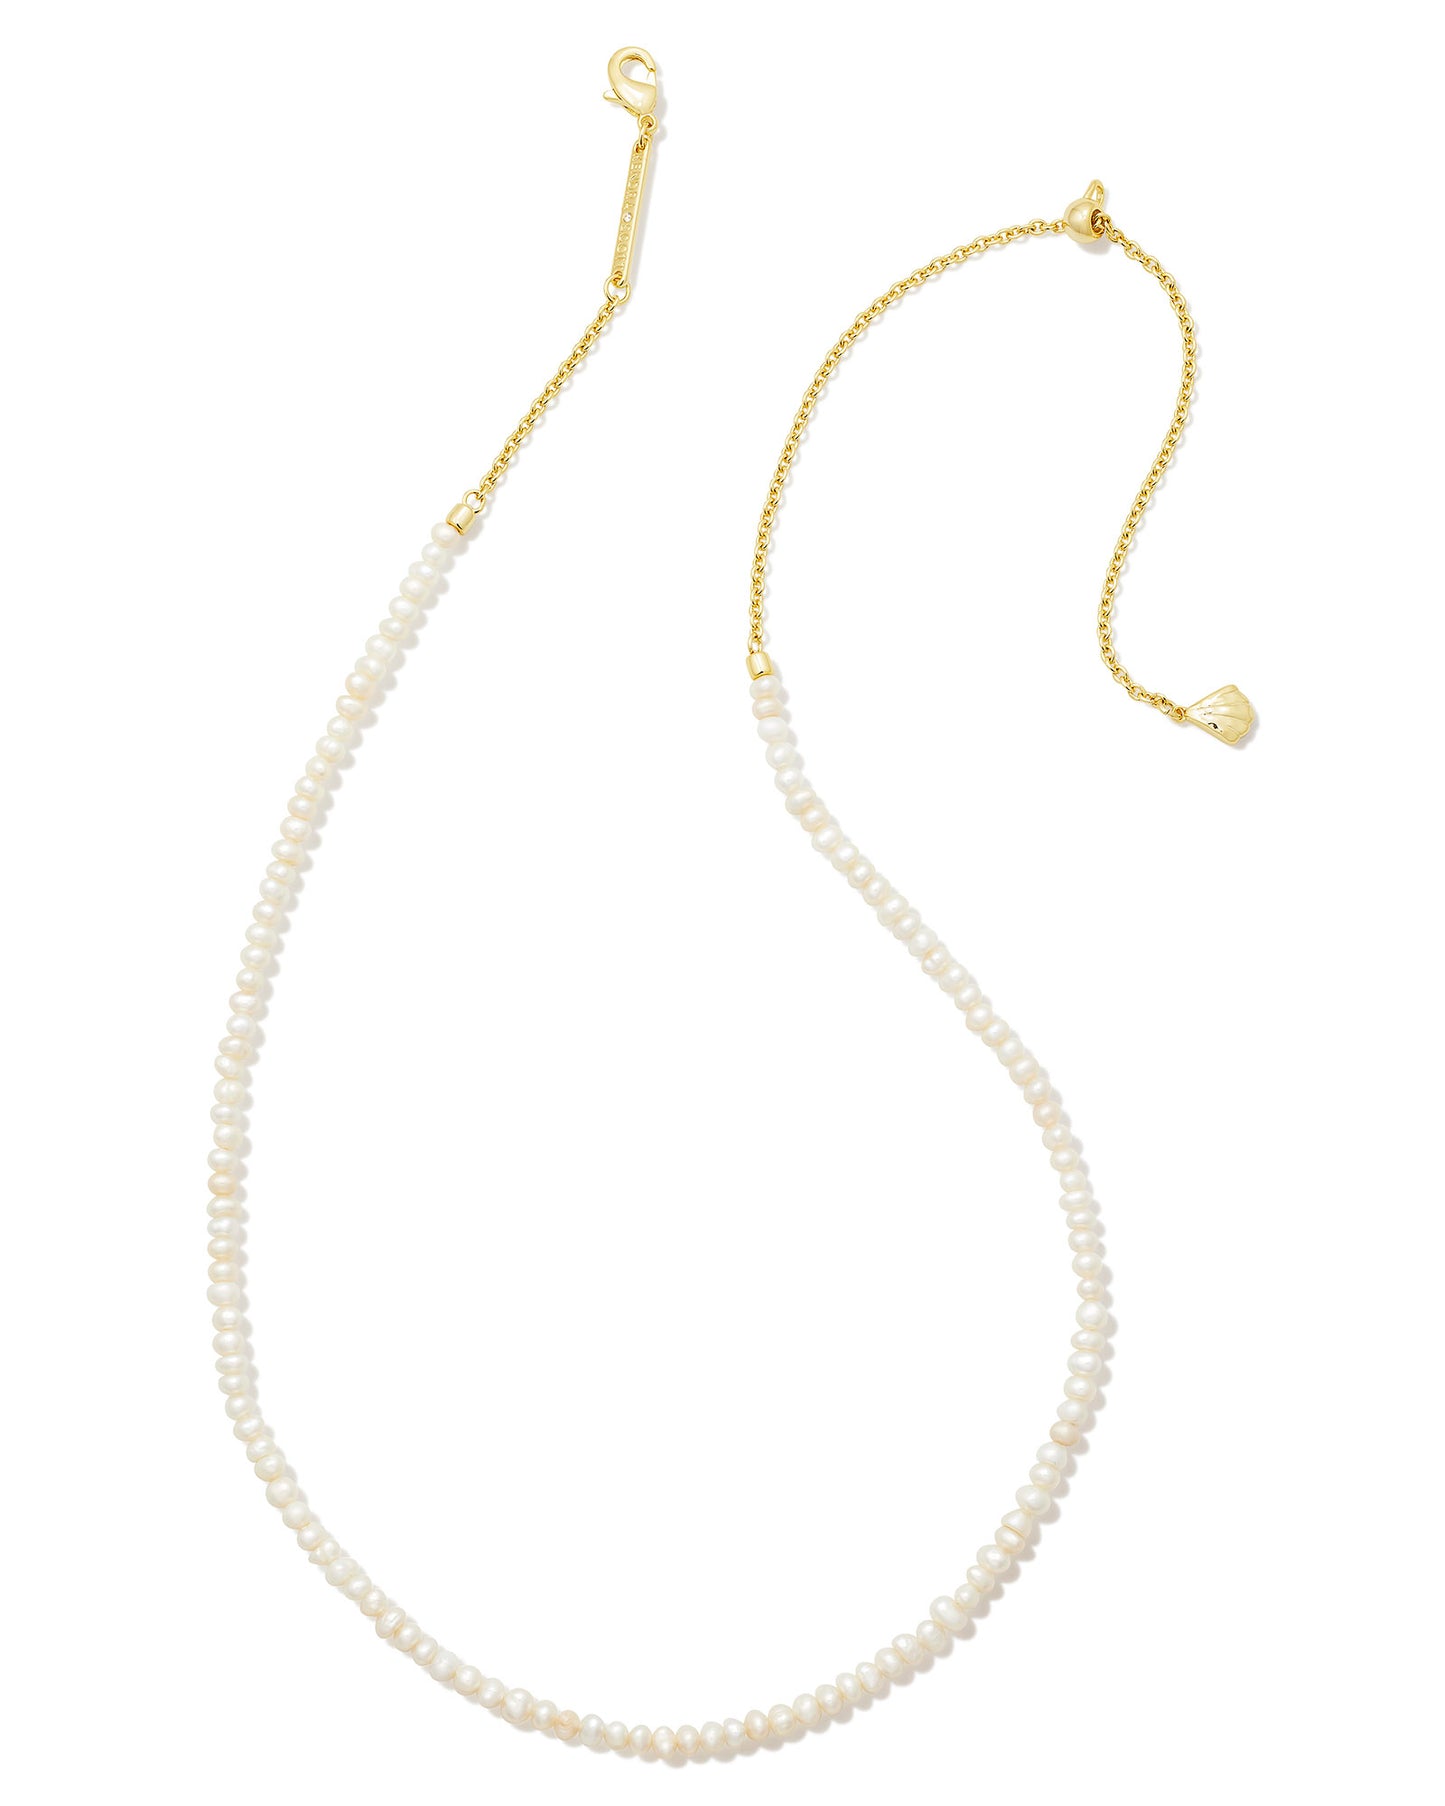 LOLO STRAND NECKLACE IN GOLD WHITE PEARL